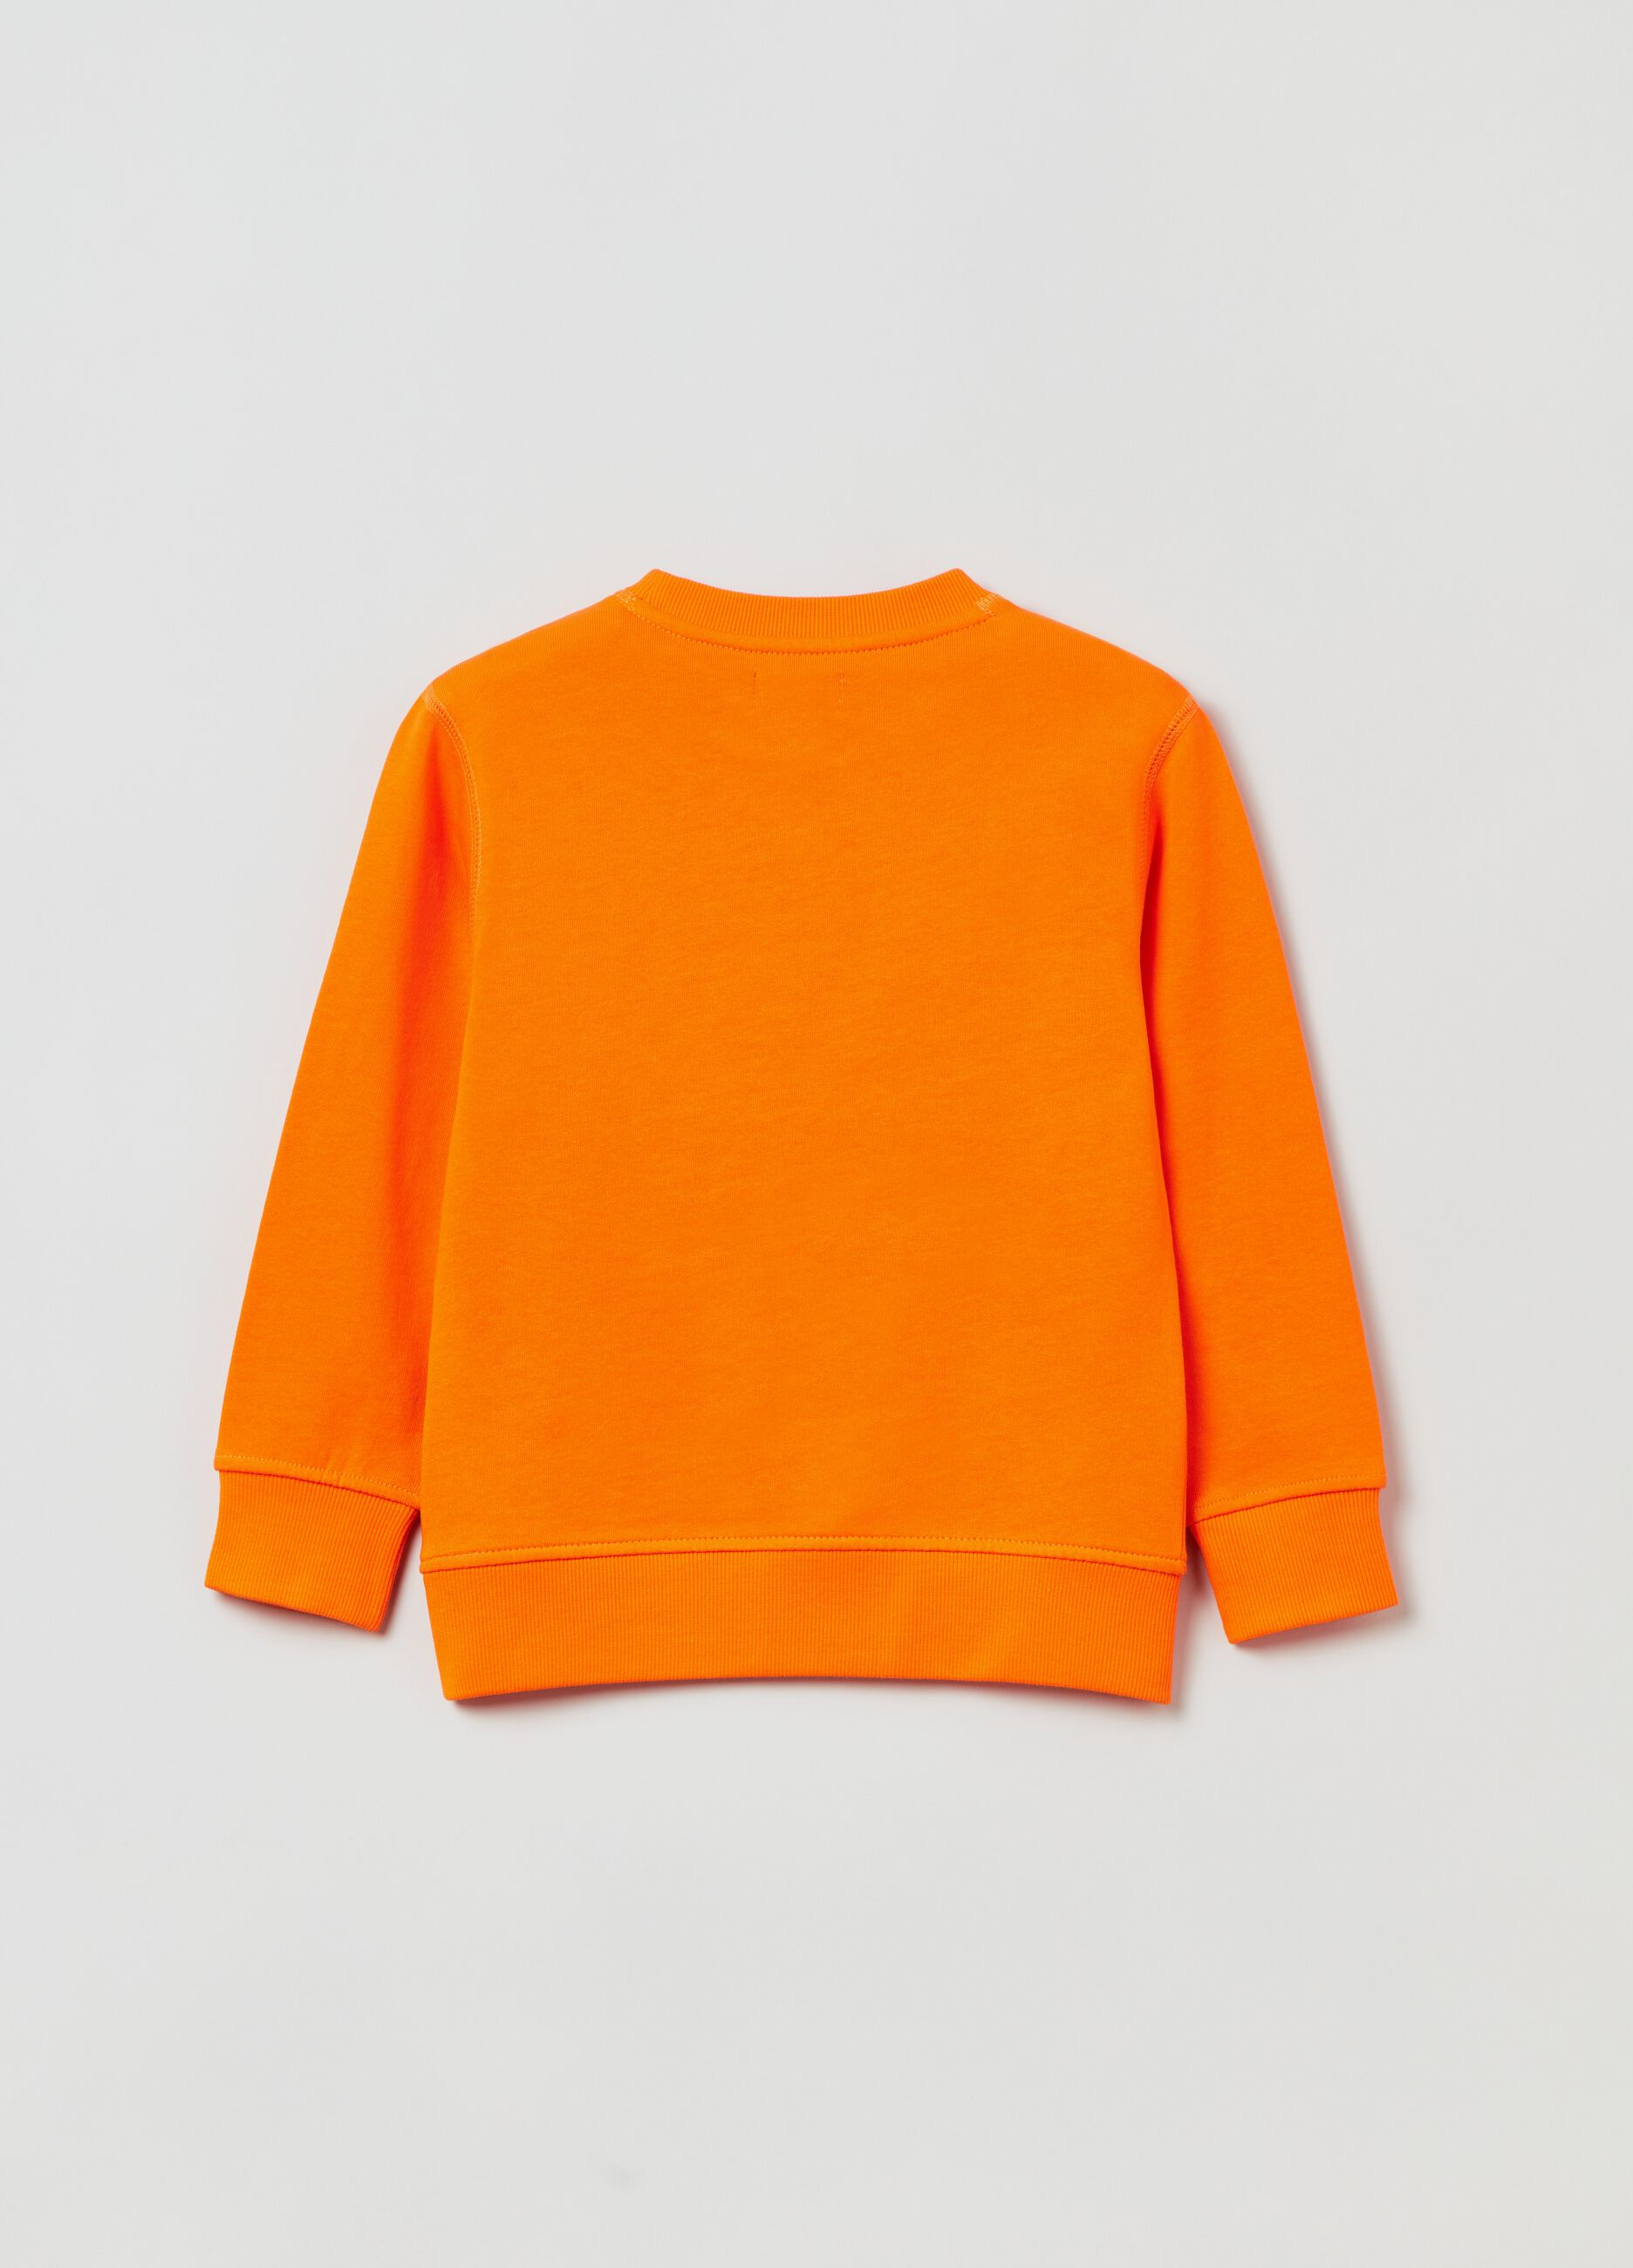 French terry sweatshirt with pocket